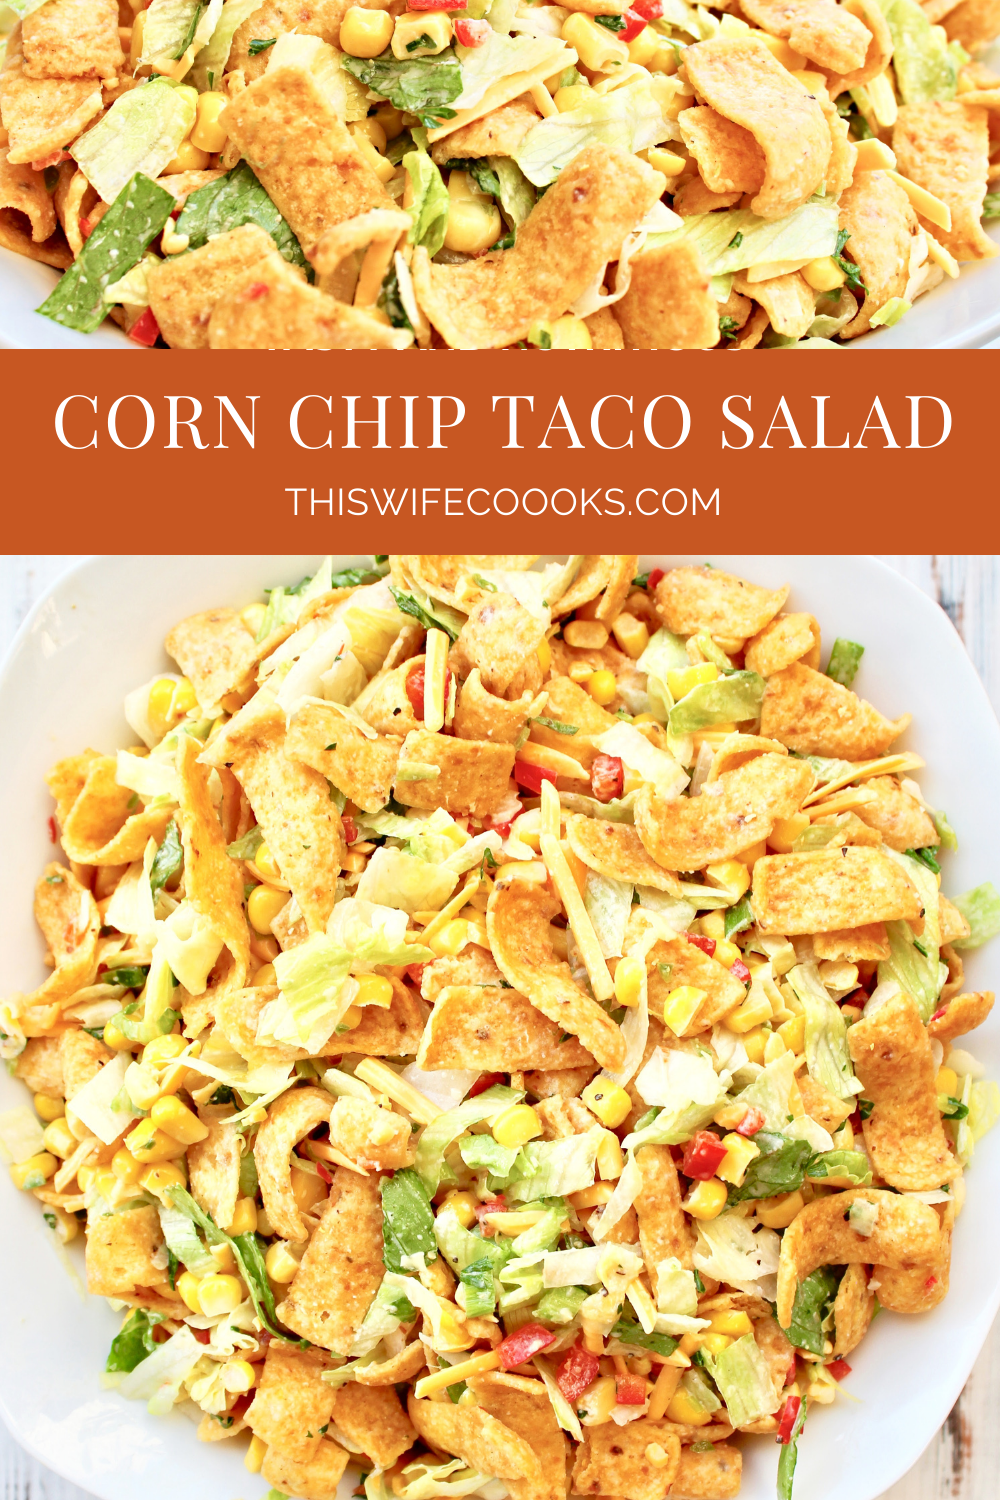 Corn Chip Taco Salad ~ This classic summer salad is great for casual dinners and potlucks. Ready to serve in about an hour. via @thiswifecooks